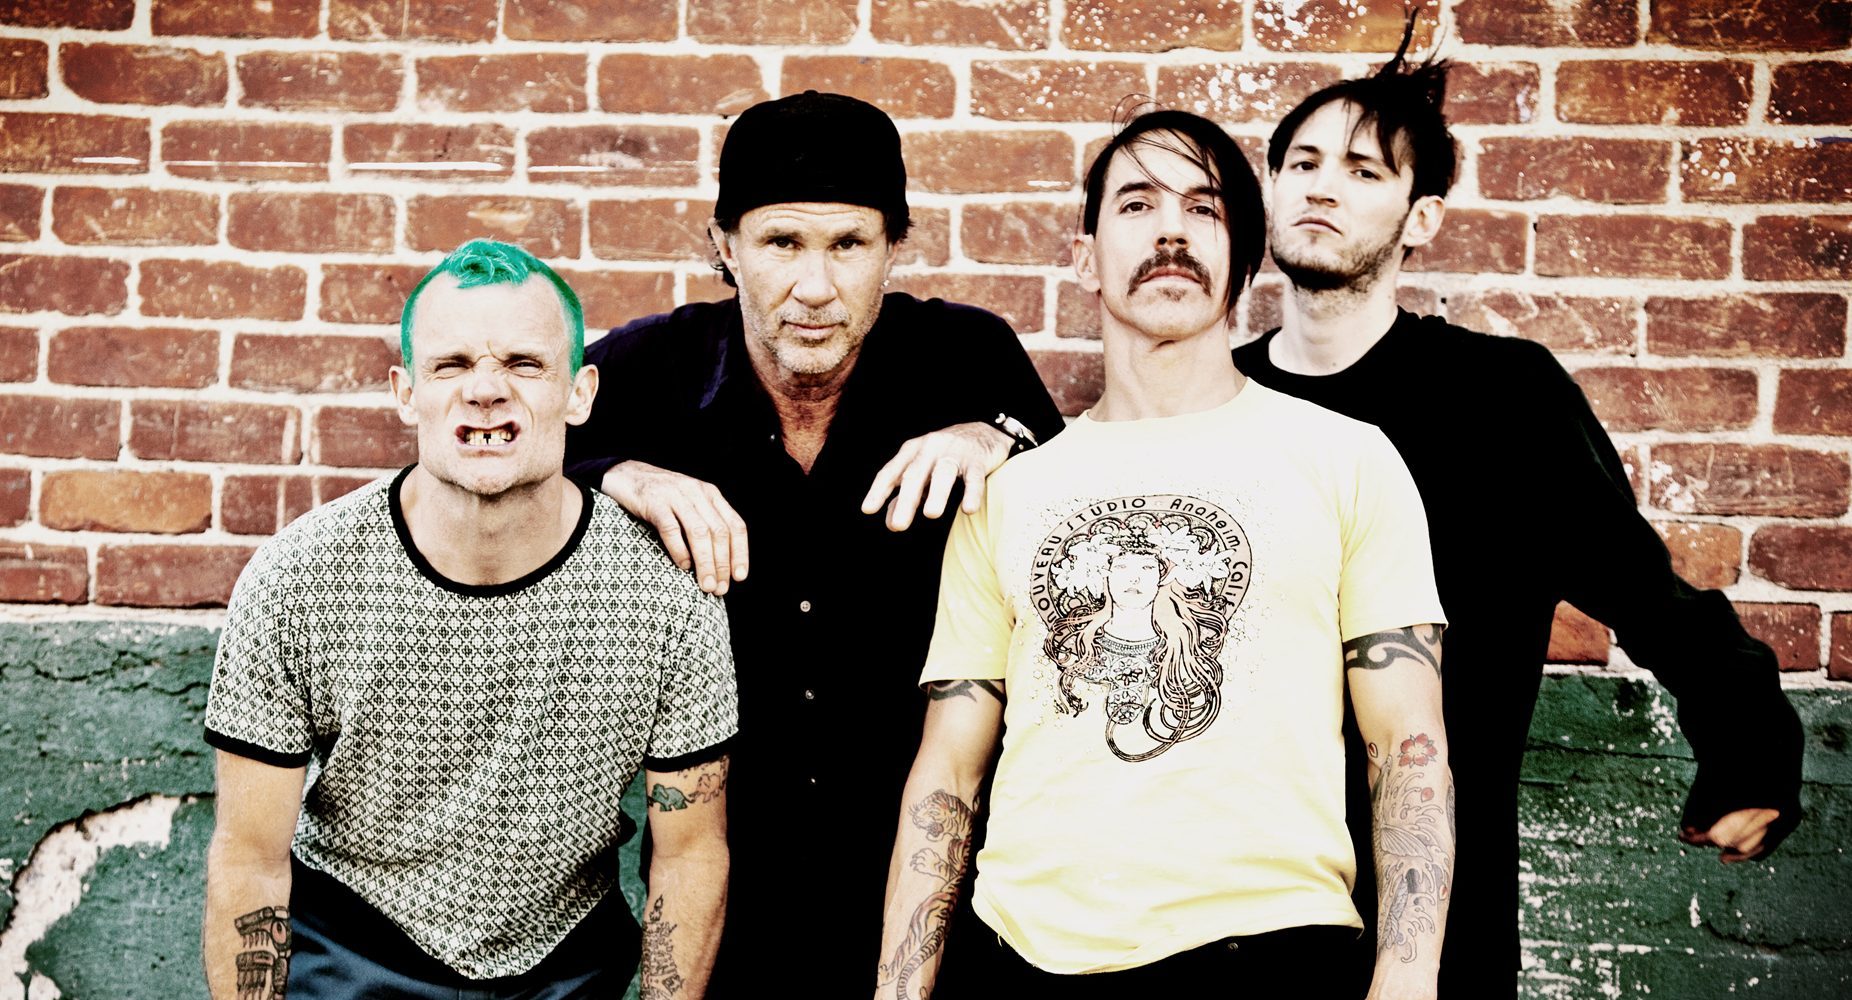 Confunden en Bielorrusia a Red Hot Chili Peppers con ¿Metallica?